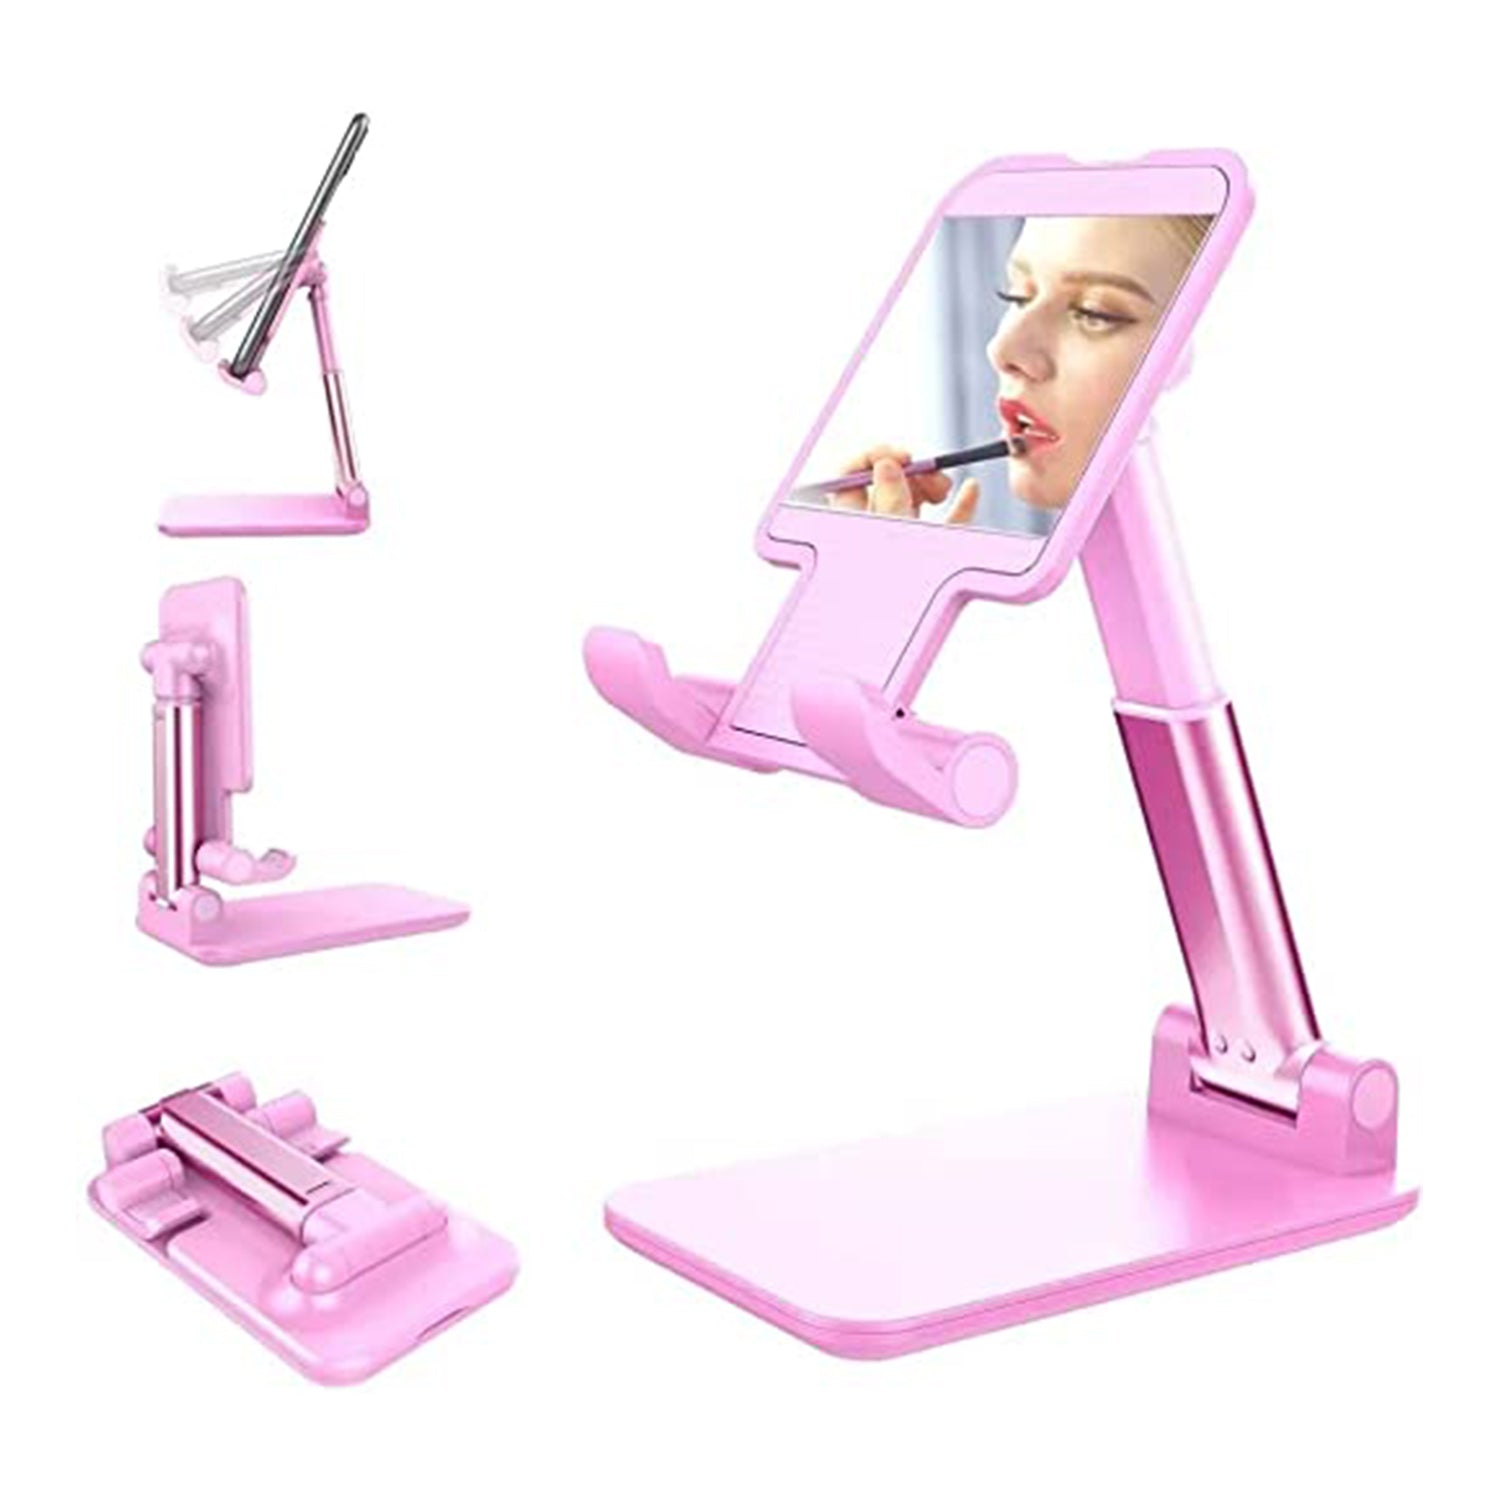 6636 Desktop Cell Phone Stand Phone Holder with mirror Full 3-Way Adjustable Phone Stand for Desk Height + Angles Perfect As Desk Organizers and Accessories.